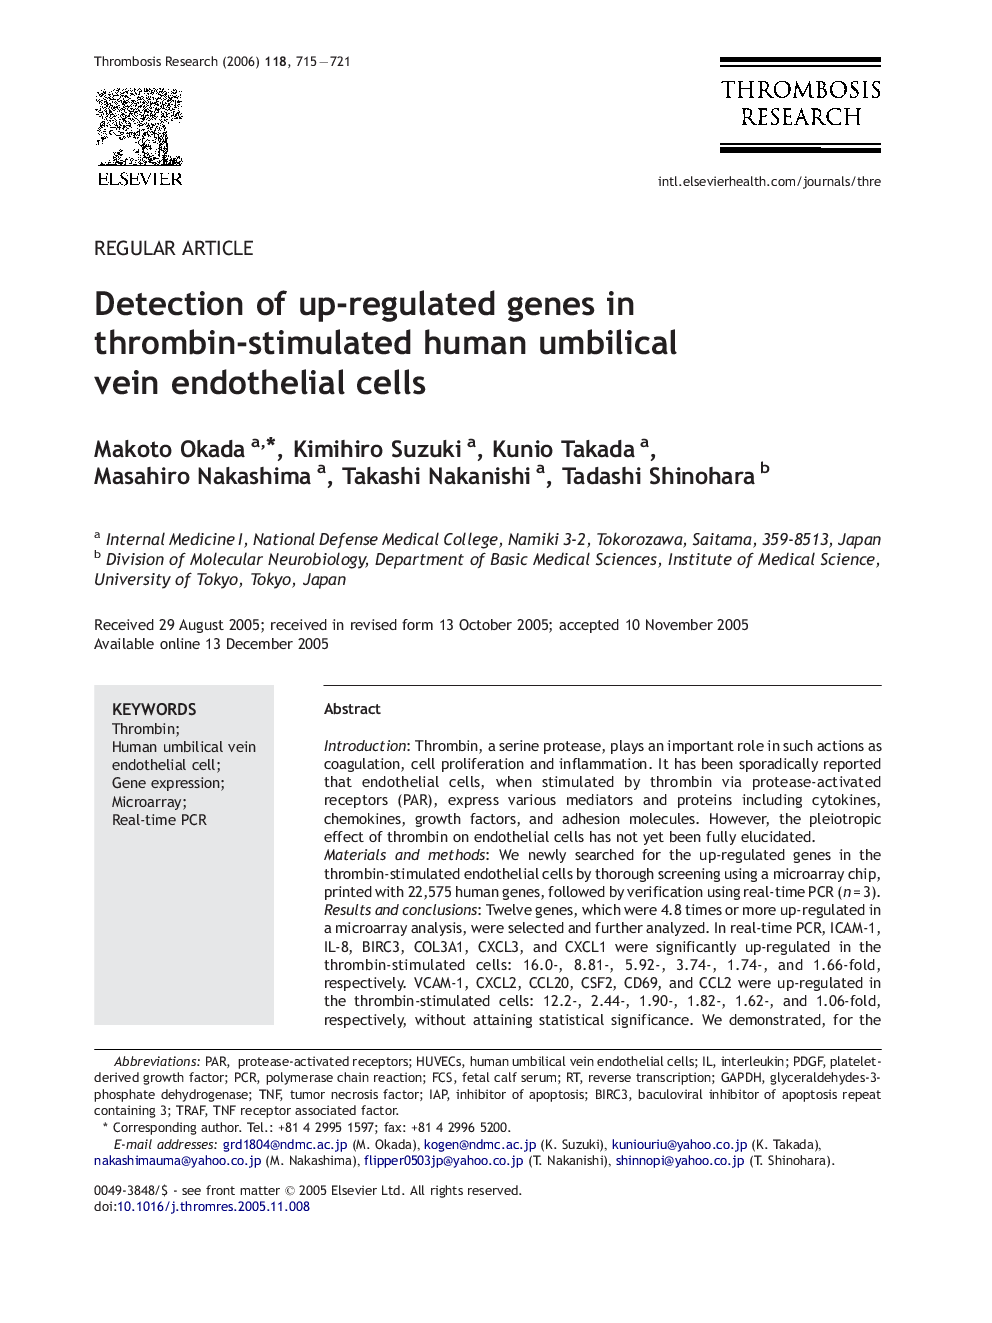 Detection of up-regulated genes in thrombin-stimulated human umbilical vein endothelial cells